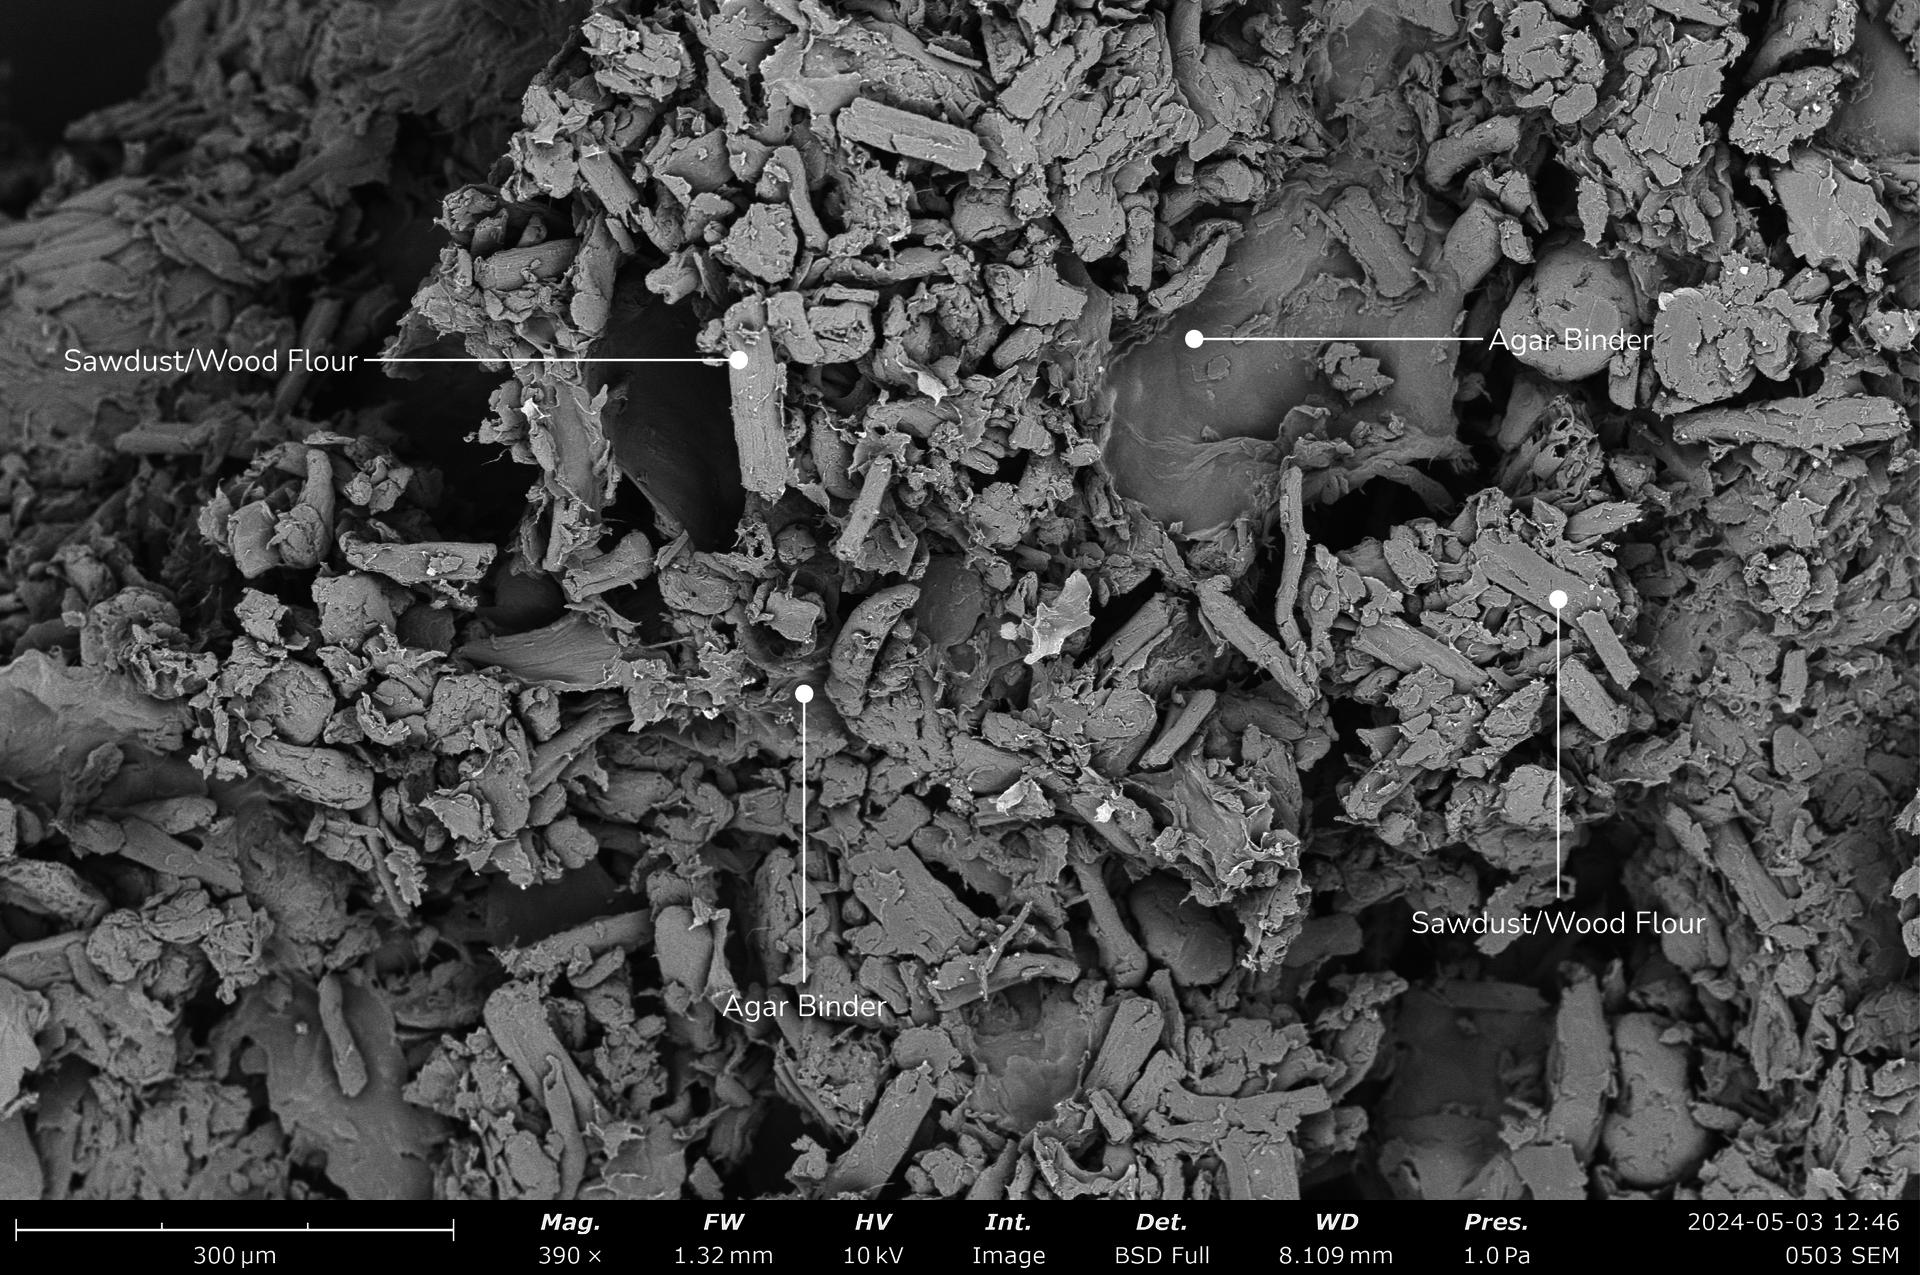 The SEM photo of the sawdust-based biomaterial shows granules of wood flour bound by an agar-based polymer at a scale of 300 micrometers.